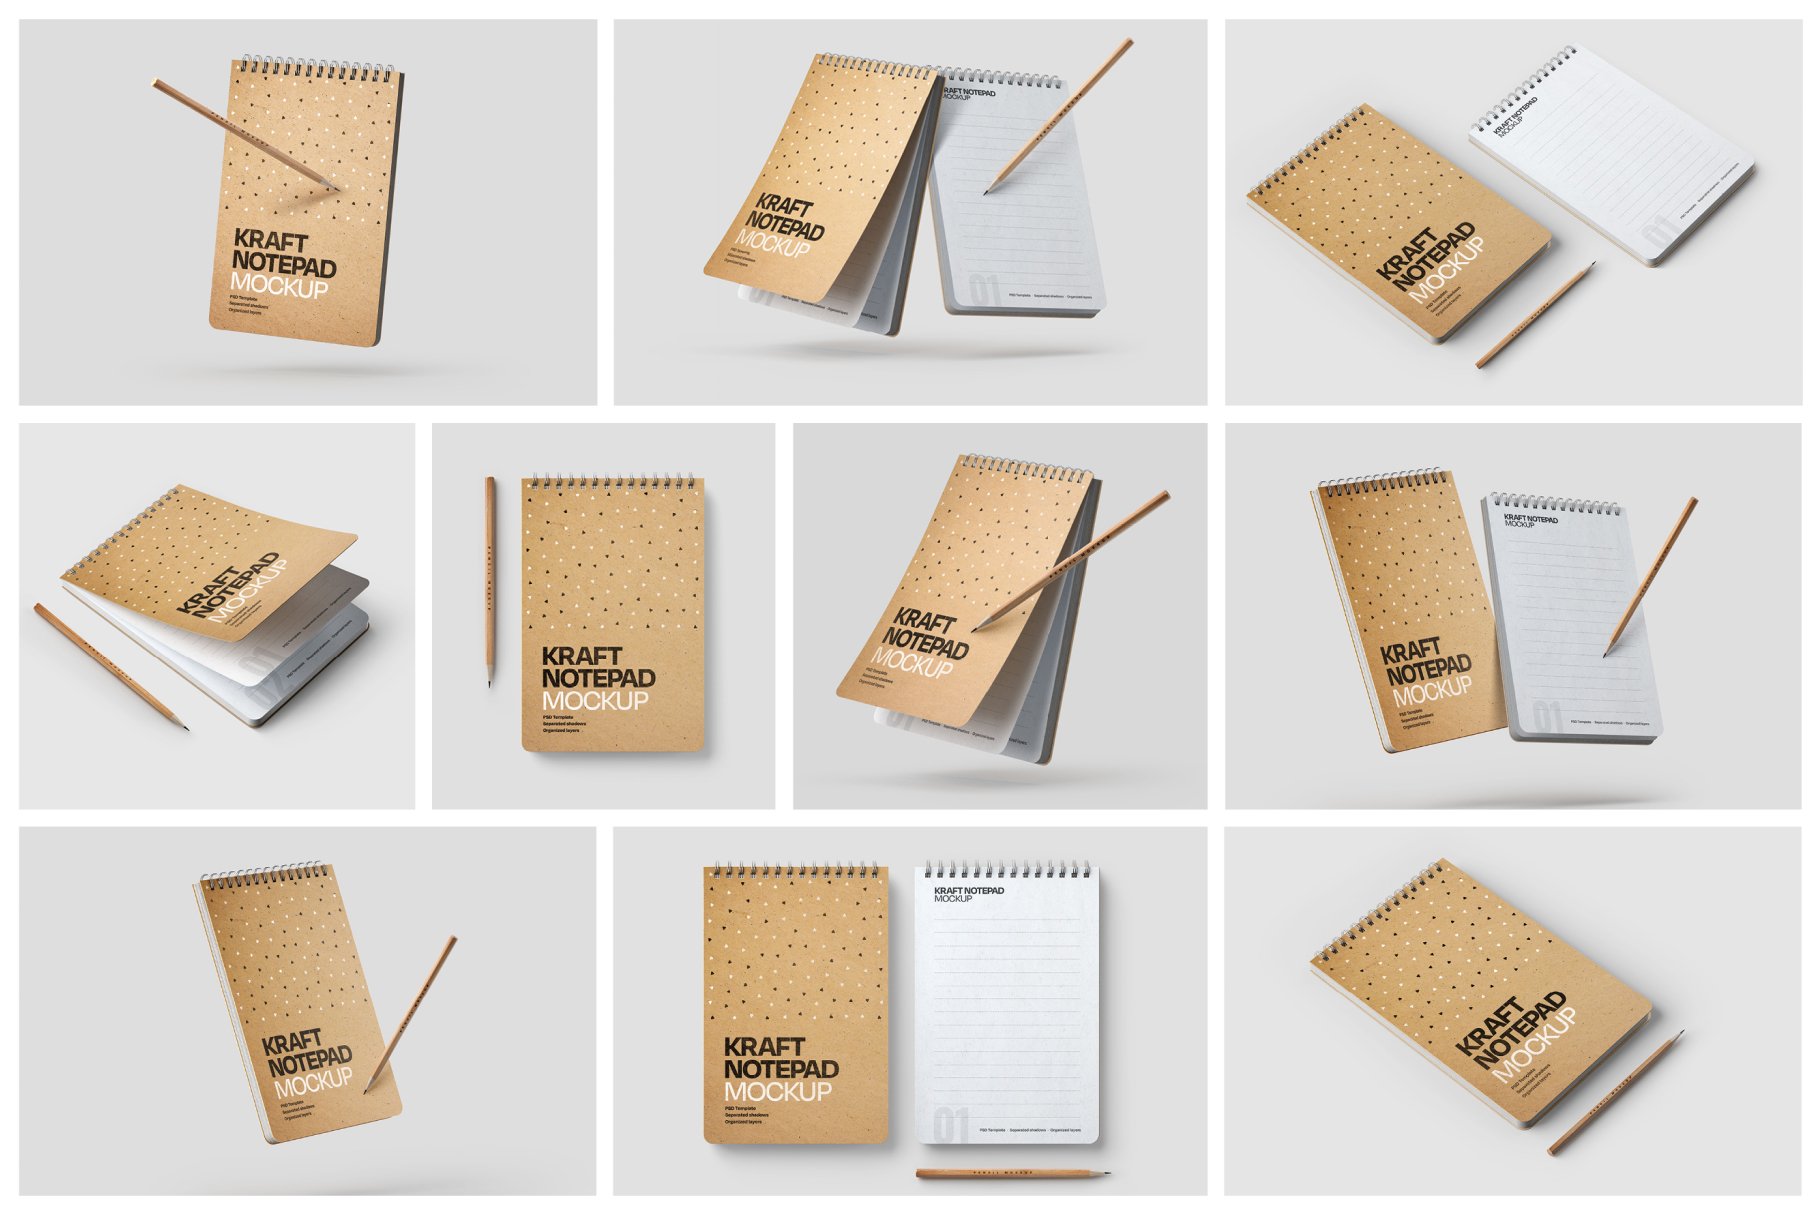 Nice craft collection of notepads.